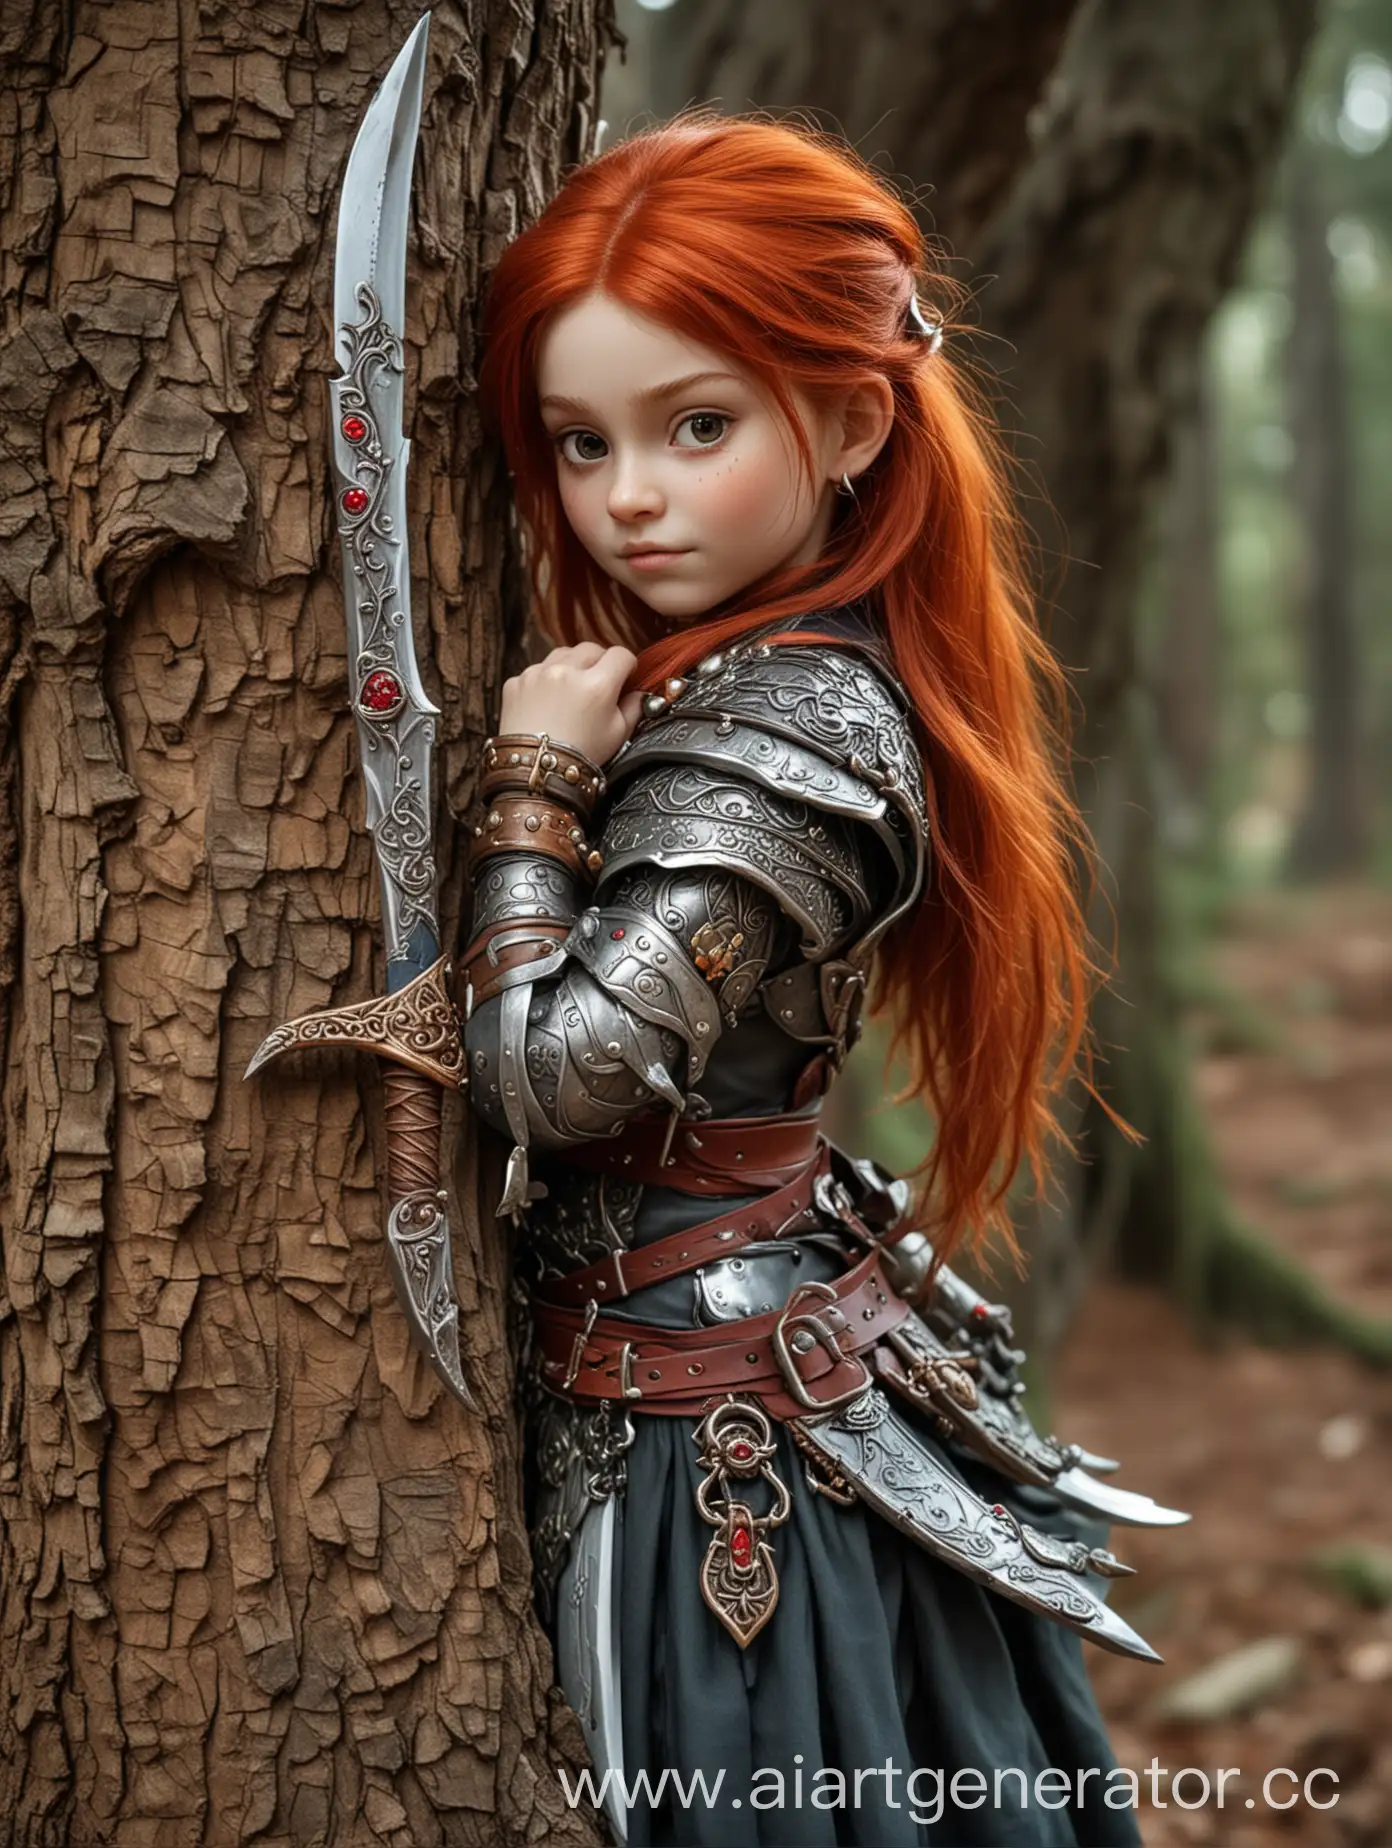 RedHaired-HalfDwarf-Girl-with-Scimitar-and-Amulet-by-a-Tree